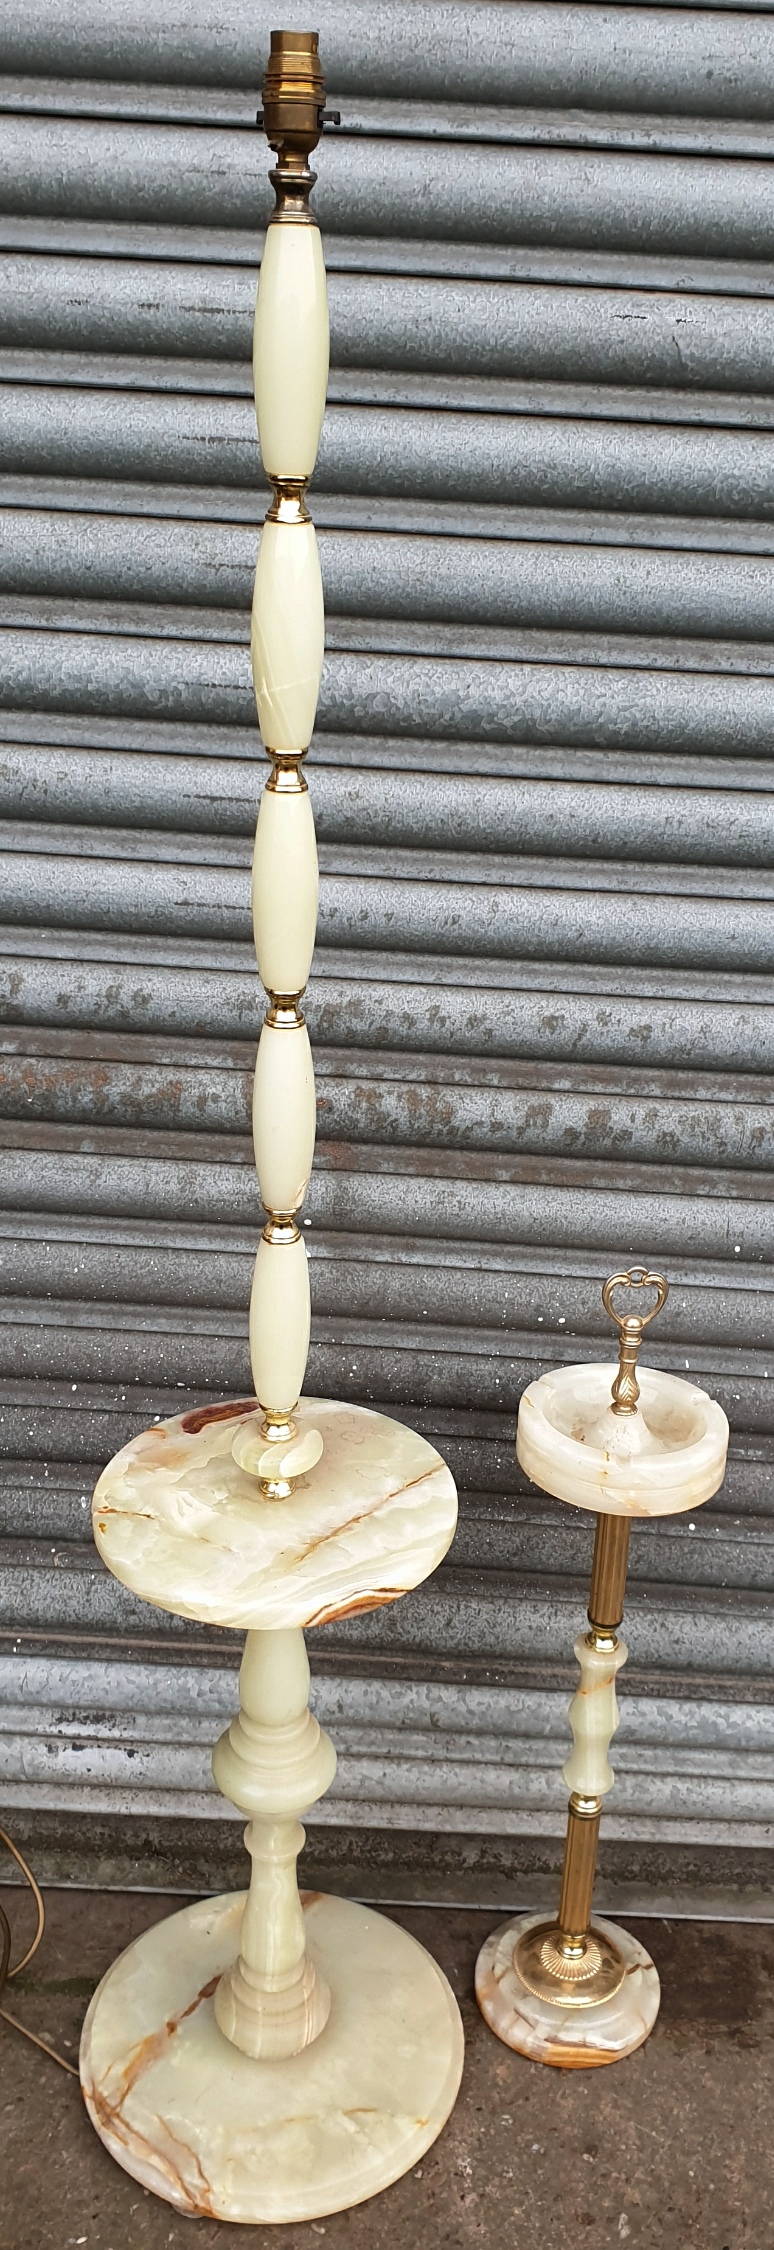 Vintage Onyx Standard Lamp & Ashtray on Stand.